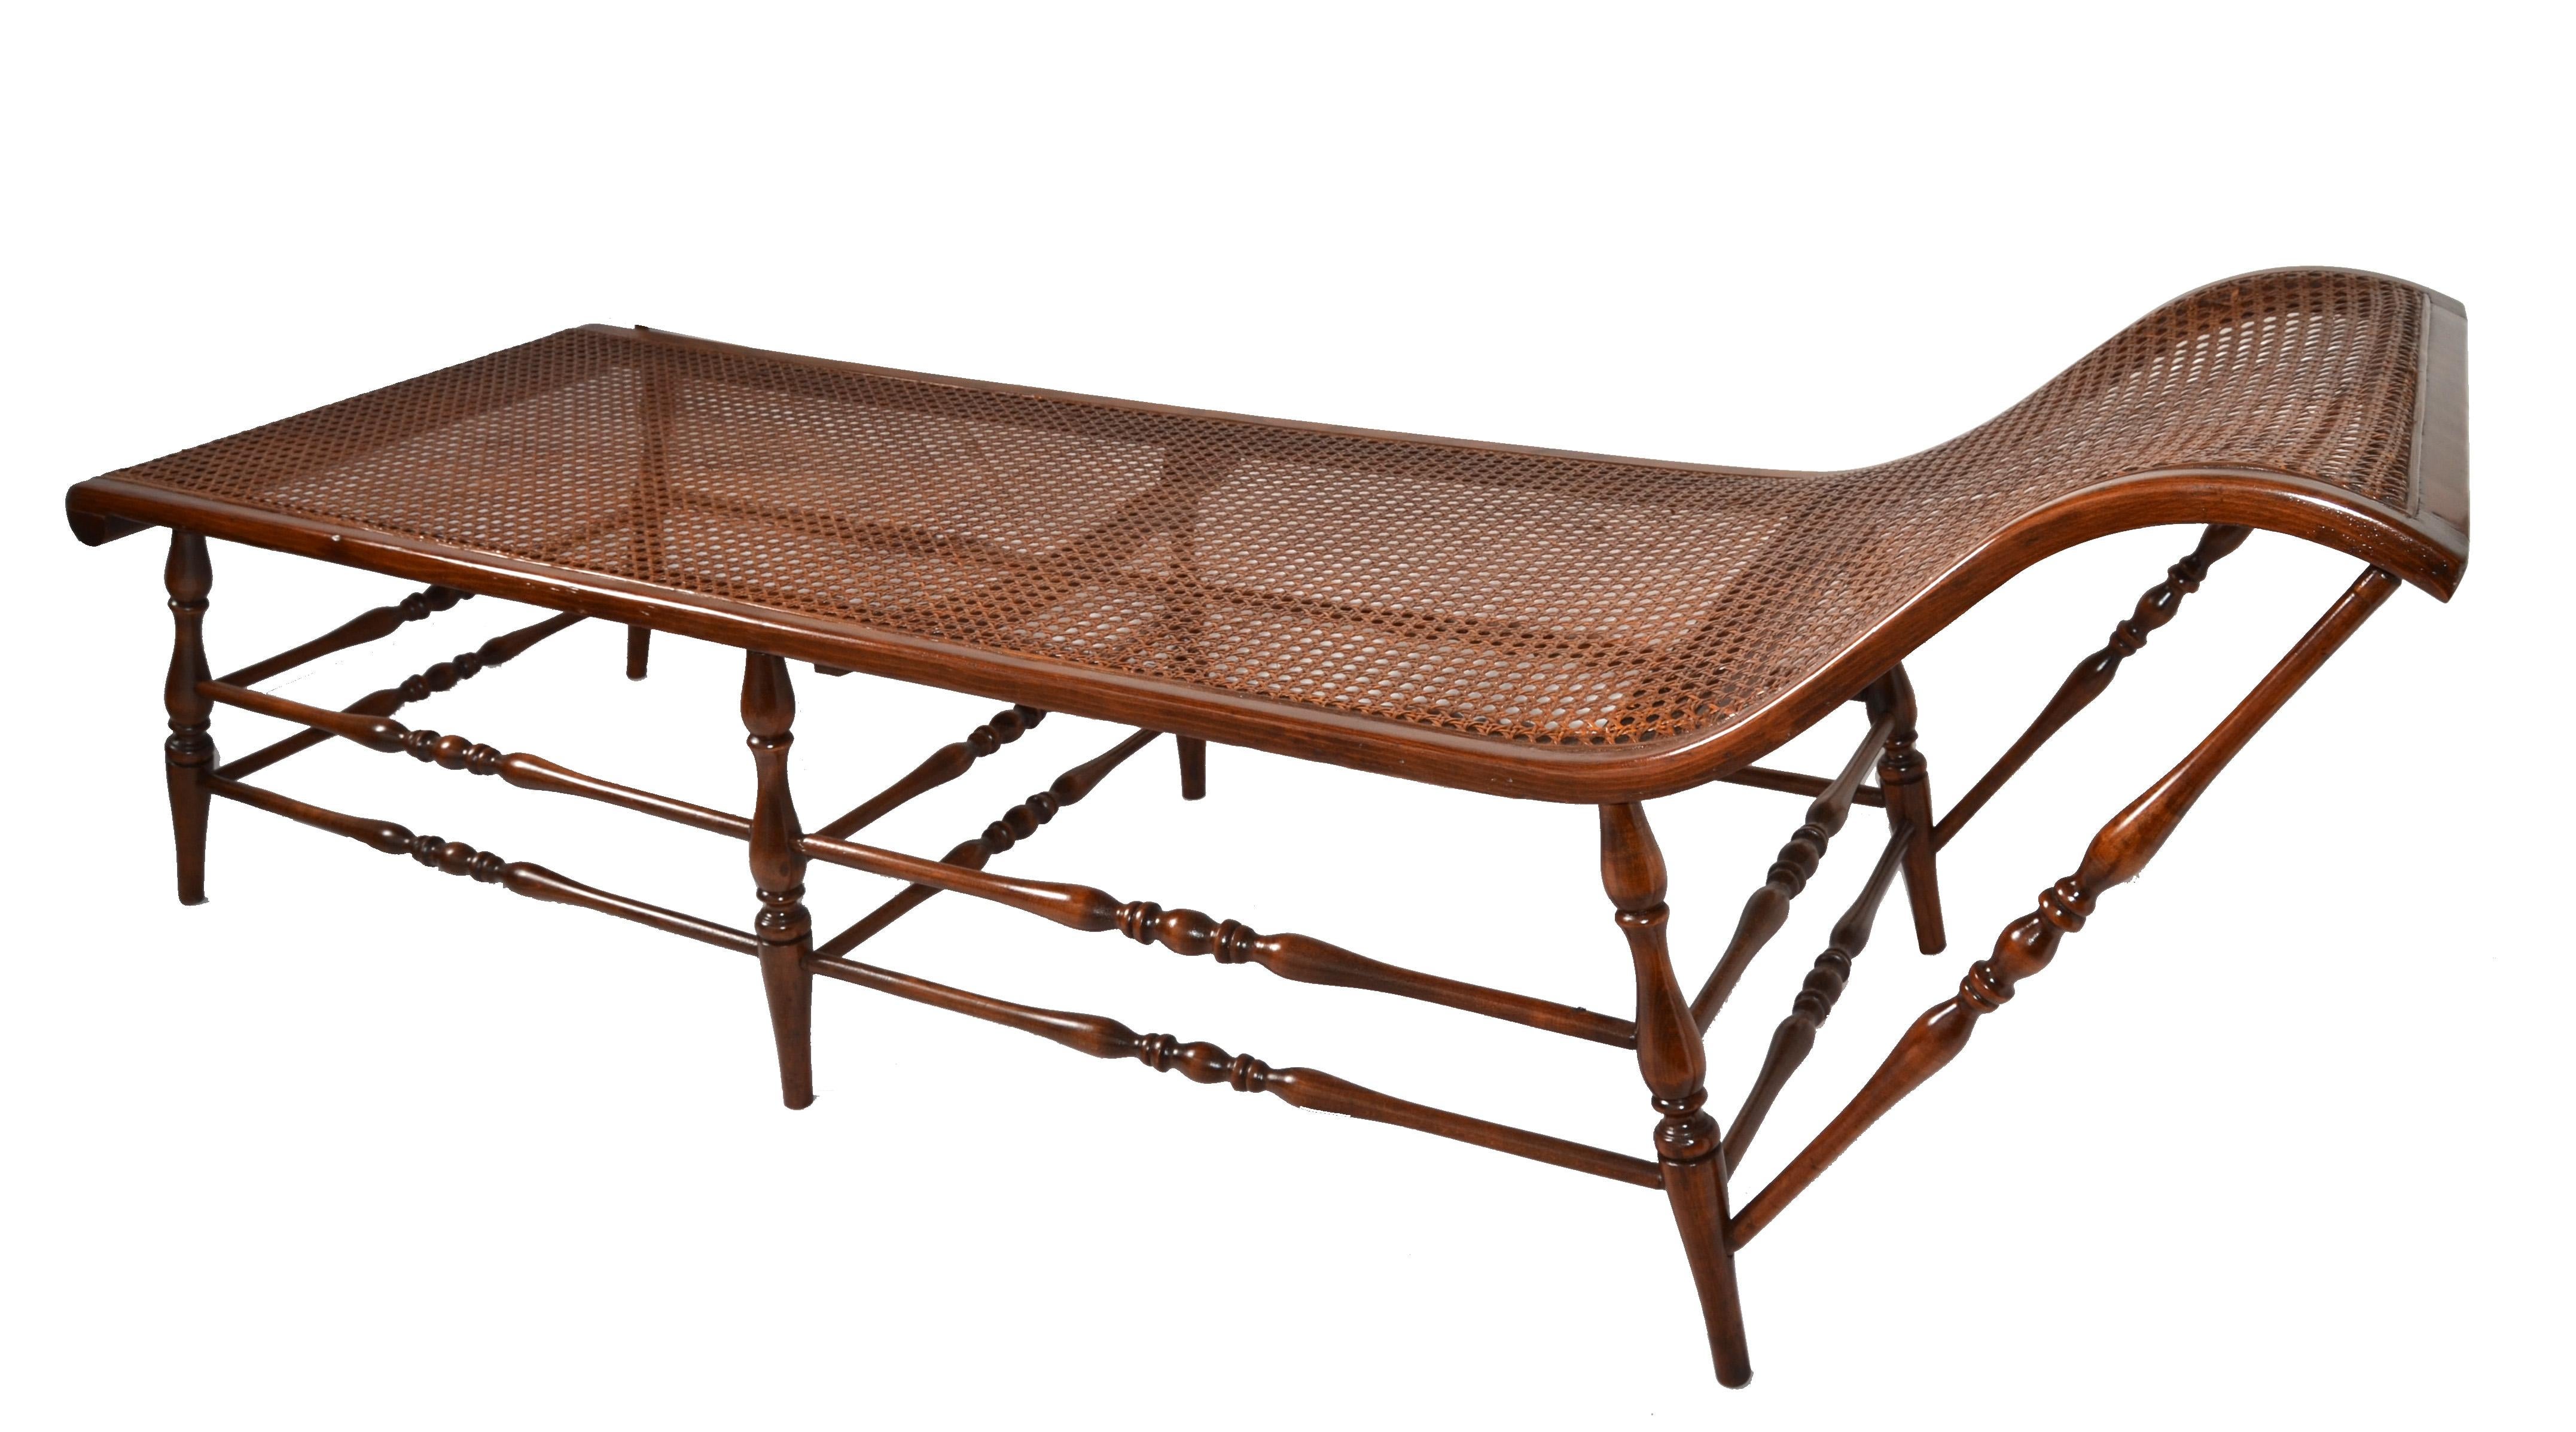 British Colonial Handwoven Cane Turned Wood Spindle Frame Chaise Lounge Daybed For Sale 9